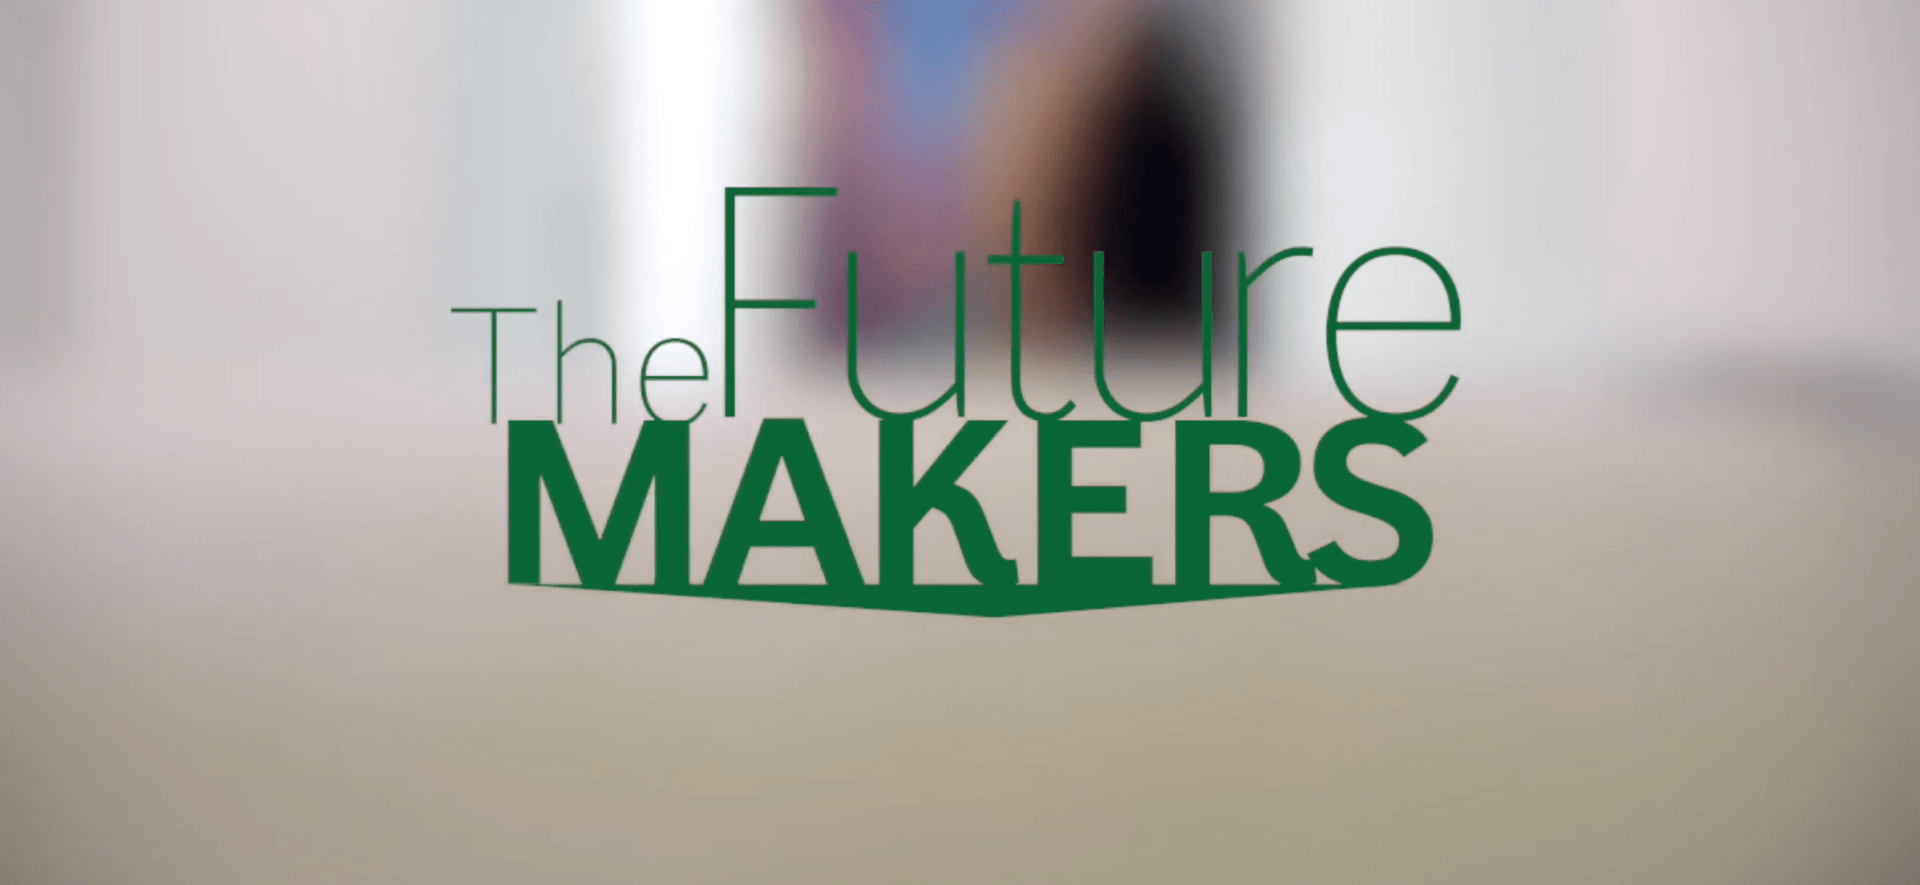 The Boston Consulting Group - The Future Makers